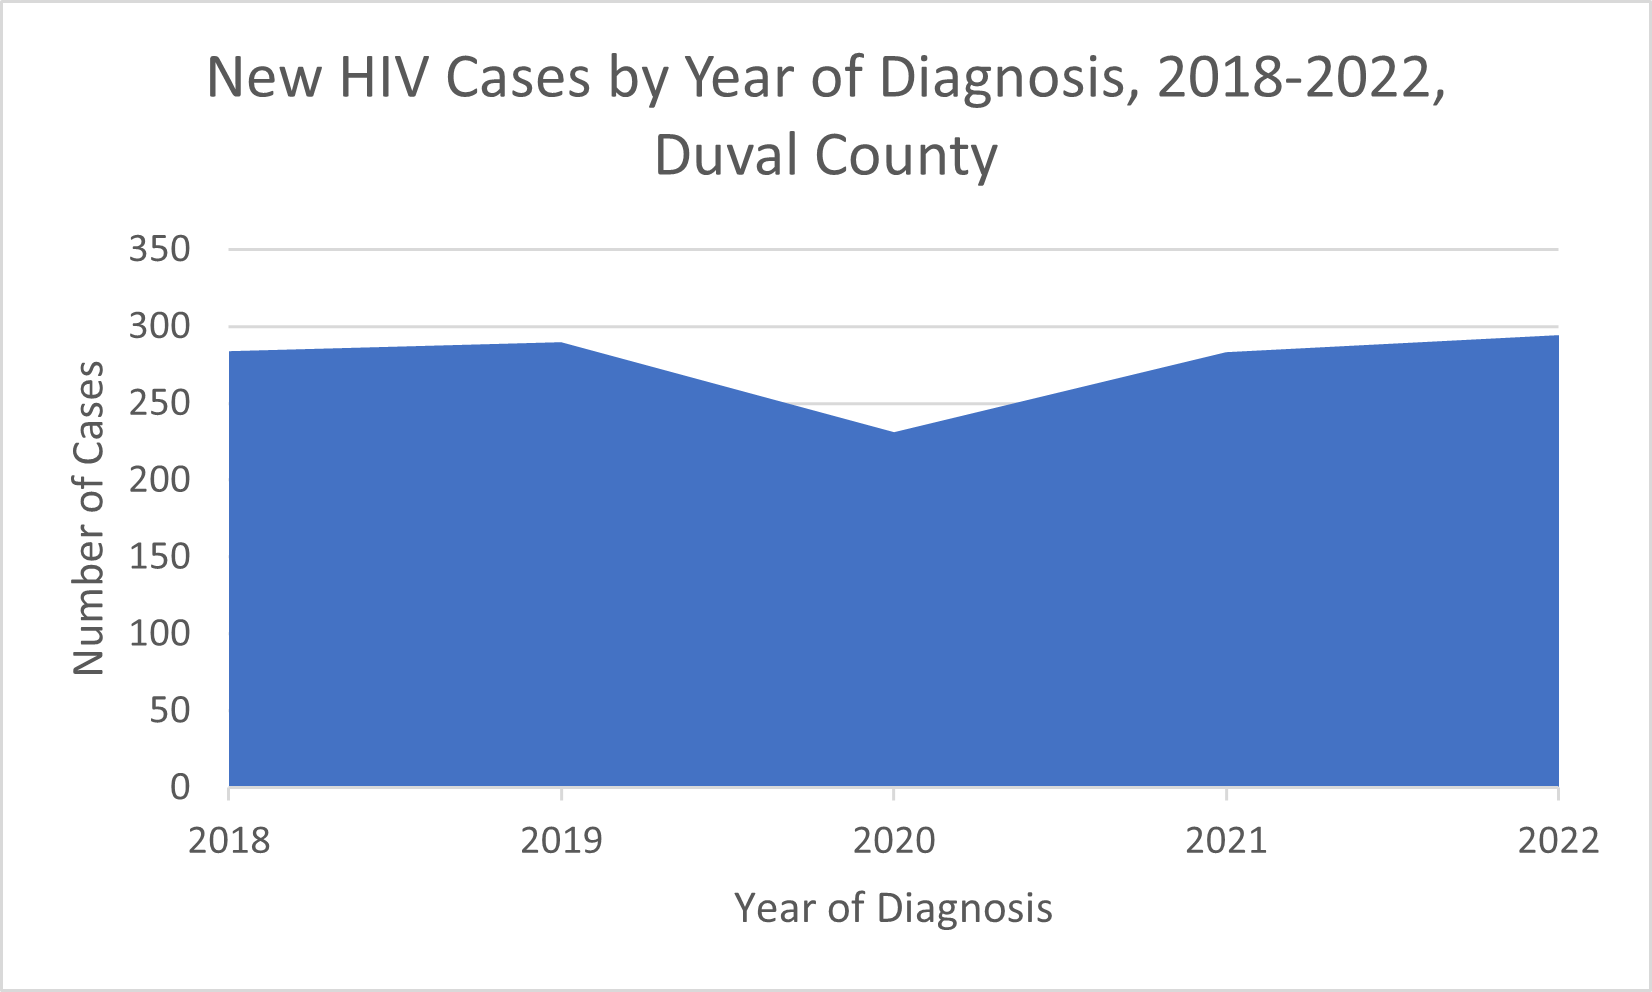 New HIV Cases by Year of Diagnosis, 2018-2022, Duval County